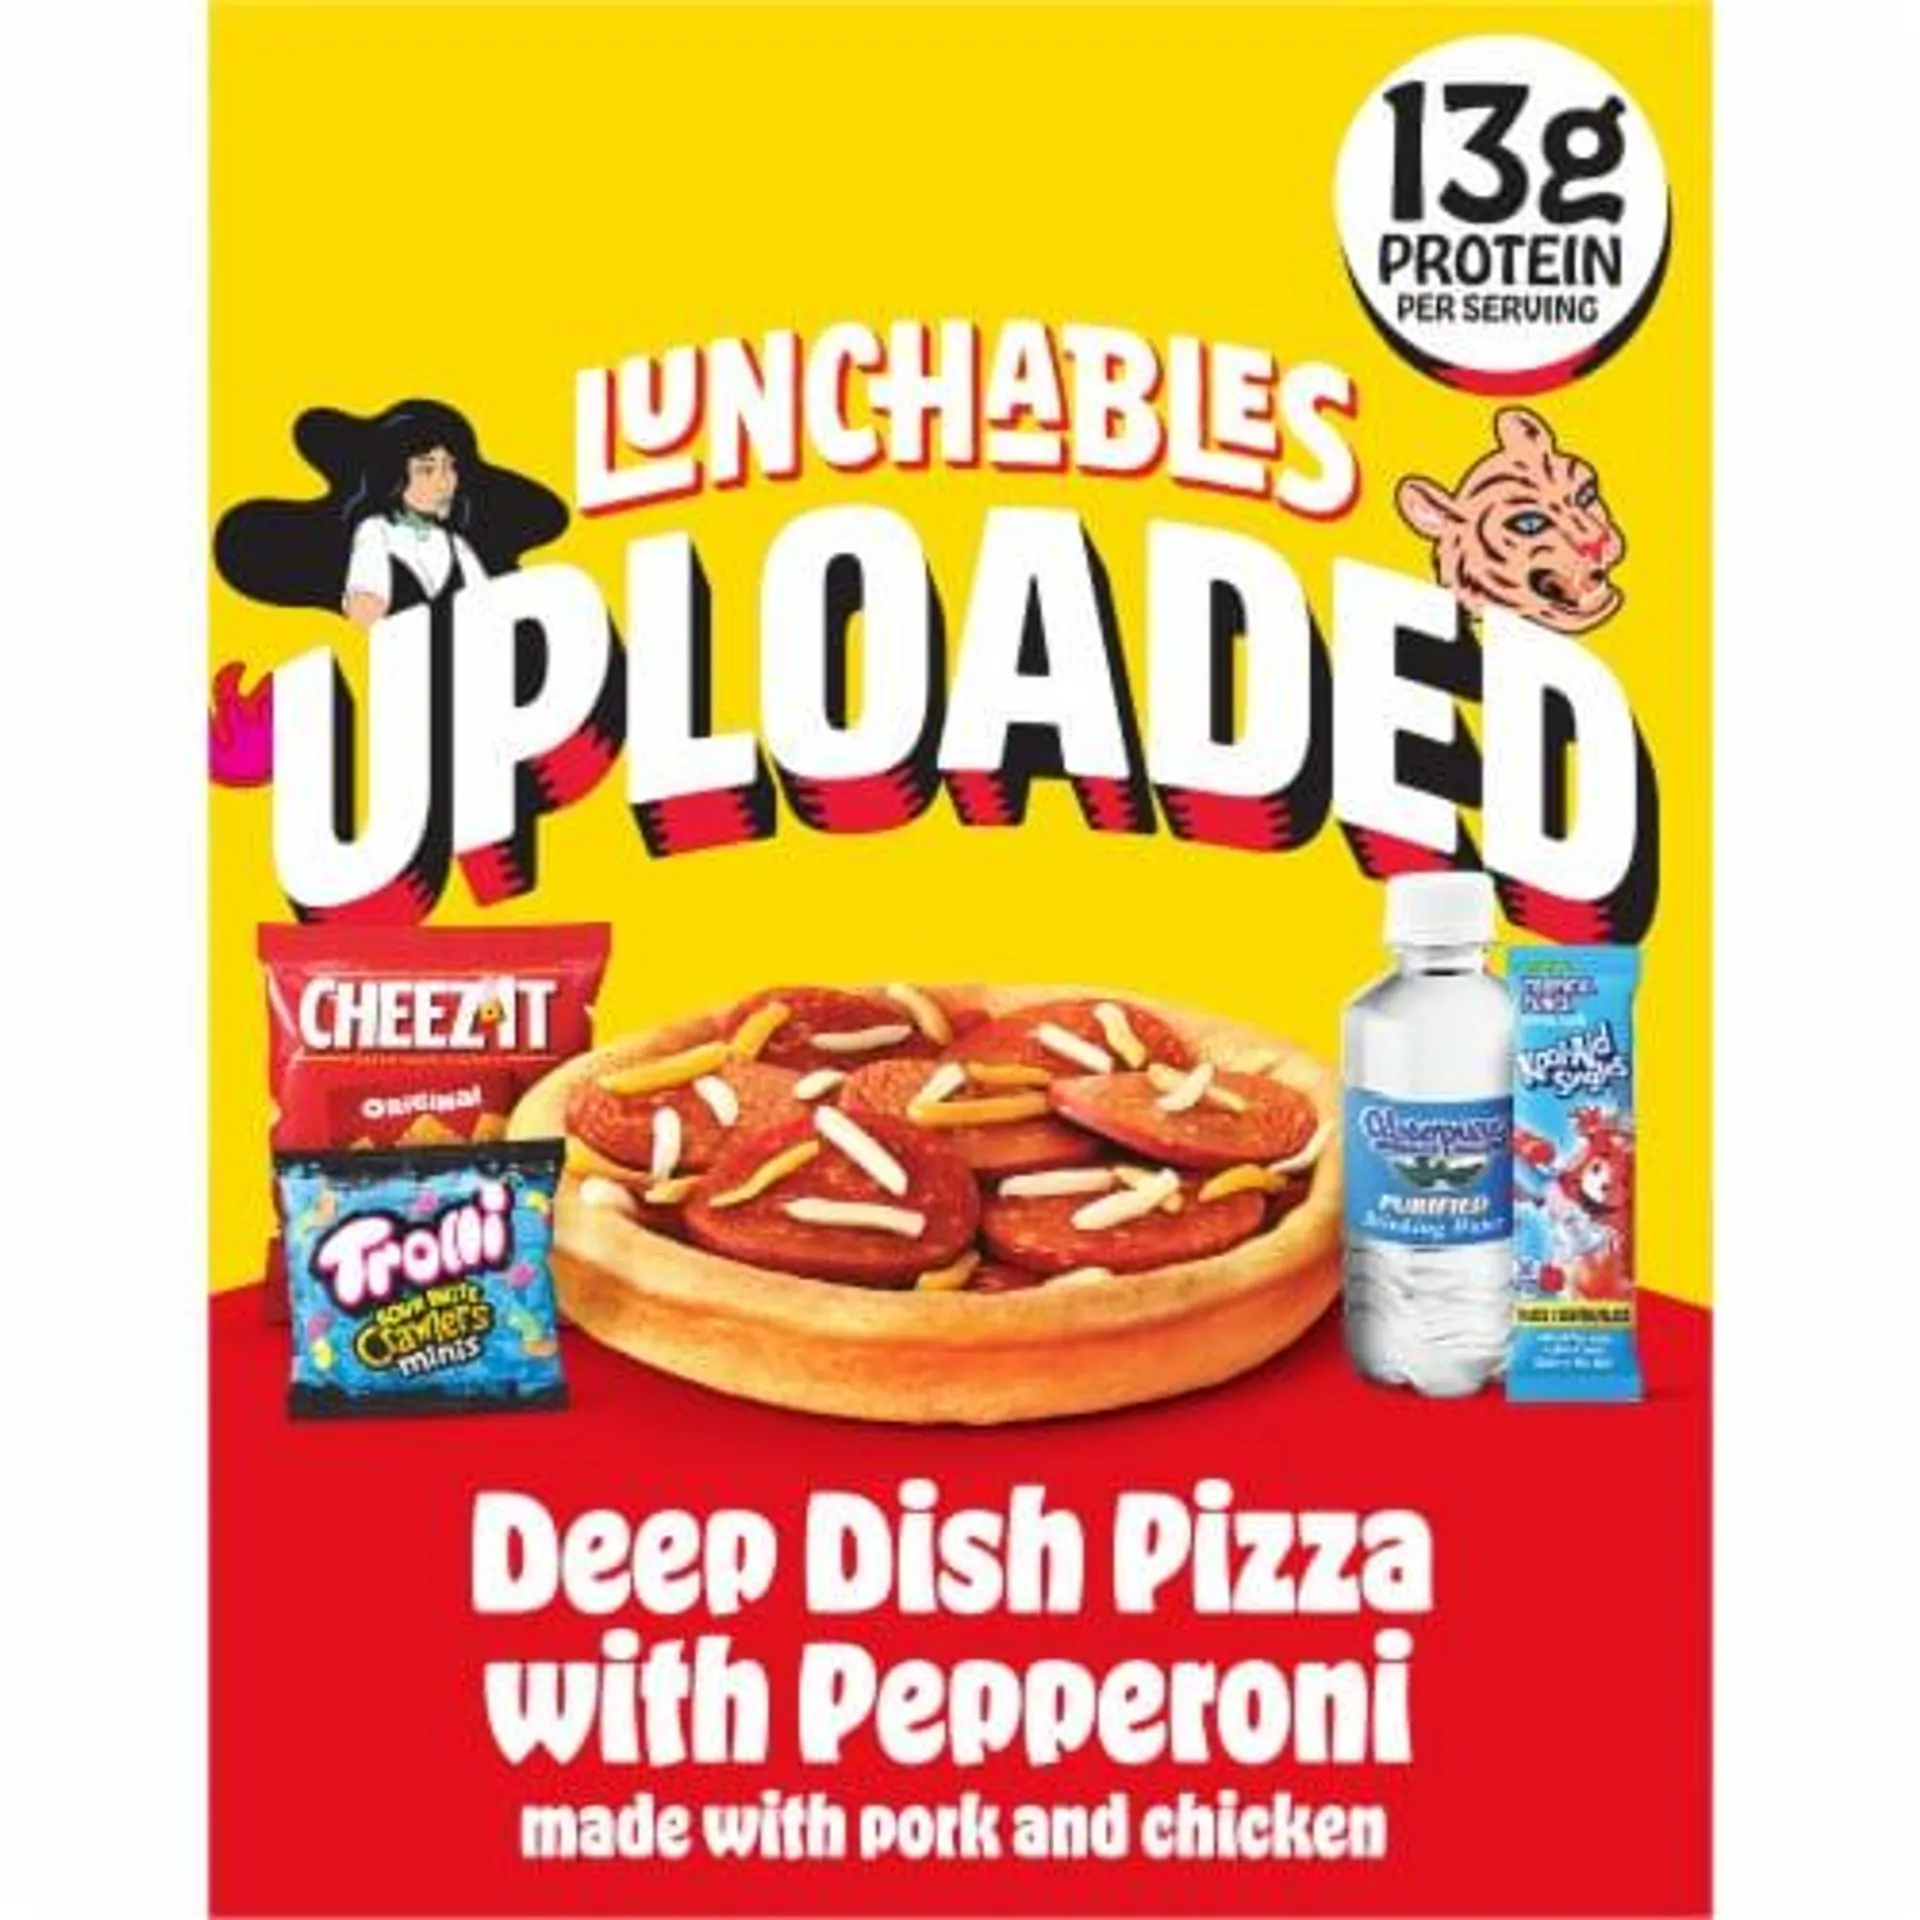 Lunchables Uploaded Pepperoni Deep Dish Pizza Kids Lunch Meal Kit